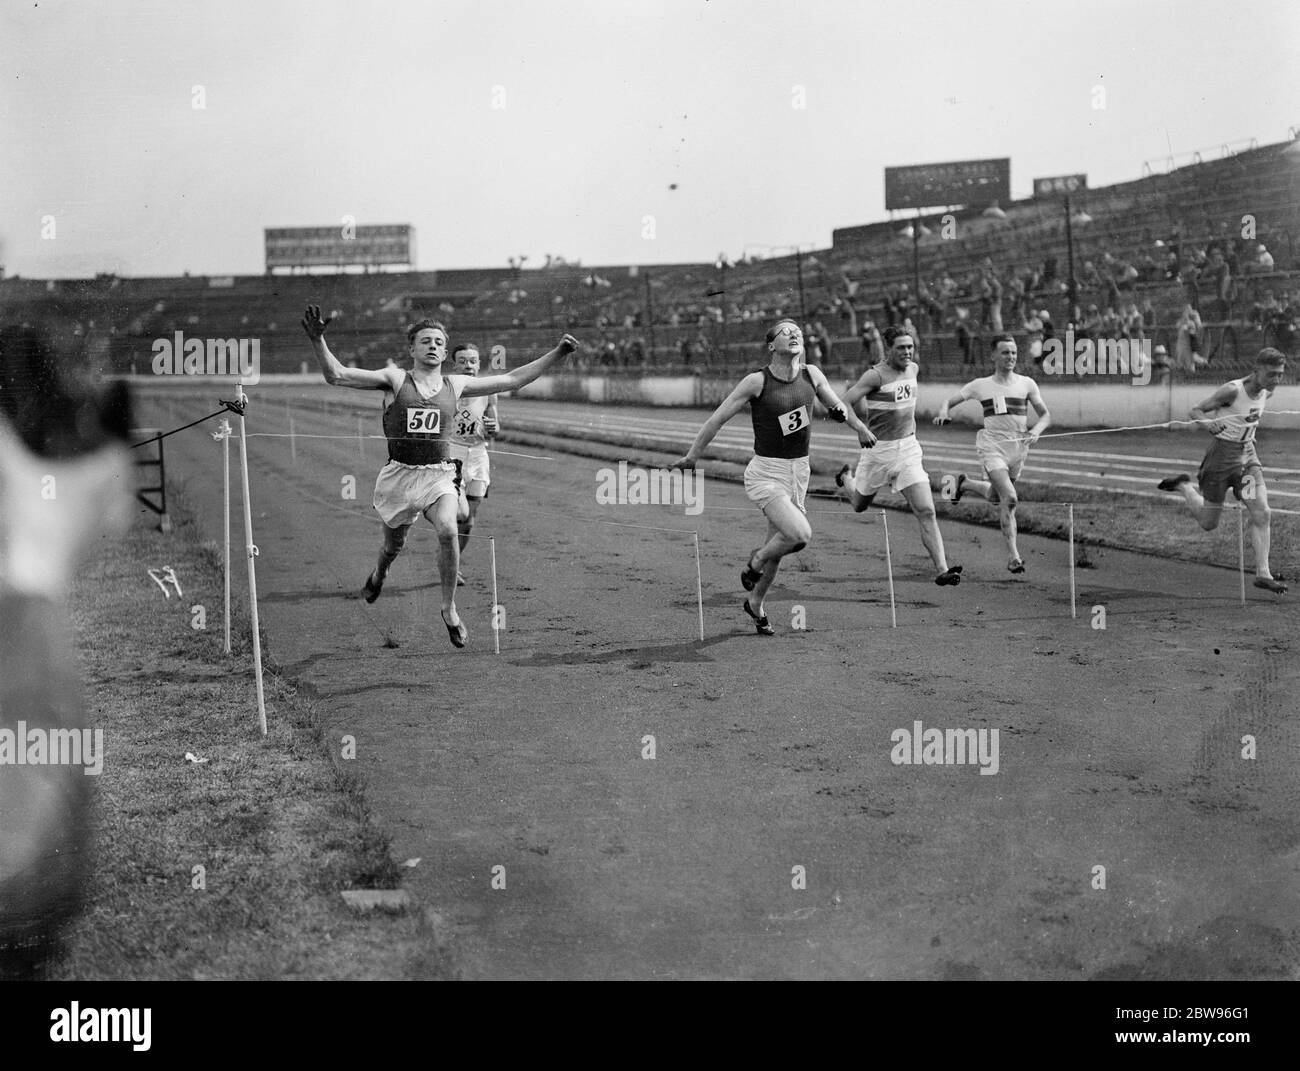 A spectacular finish at junior amateur athietic association sports . J S K Glover , of Wallasey Athletic Club , ( No 50 ) extreme left , winning the 100 yards final , in a spectacular finish at the Junior Amateur Athletic Association Sports , at Stamford Bridge . 25 June 1932 Stock Photo